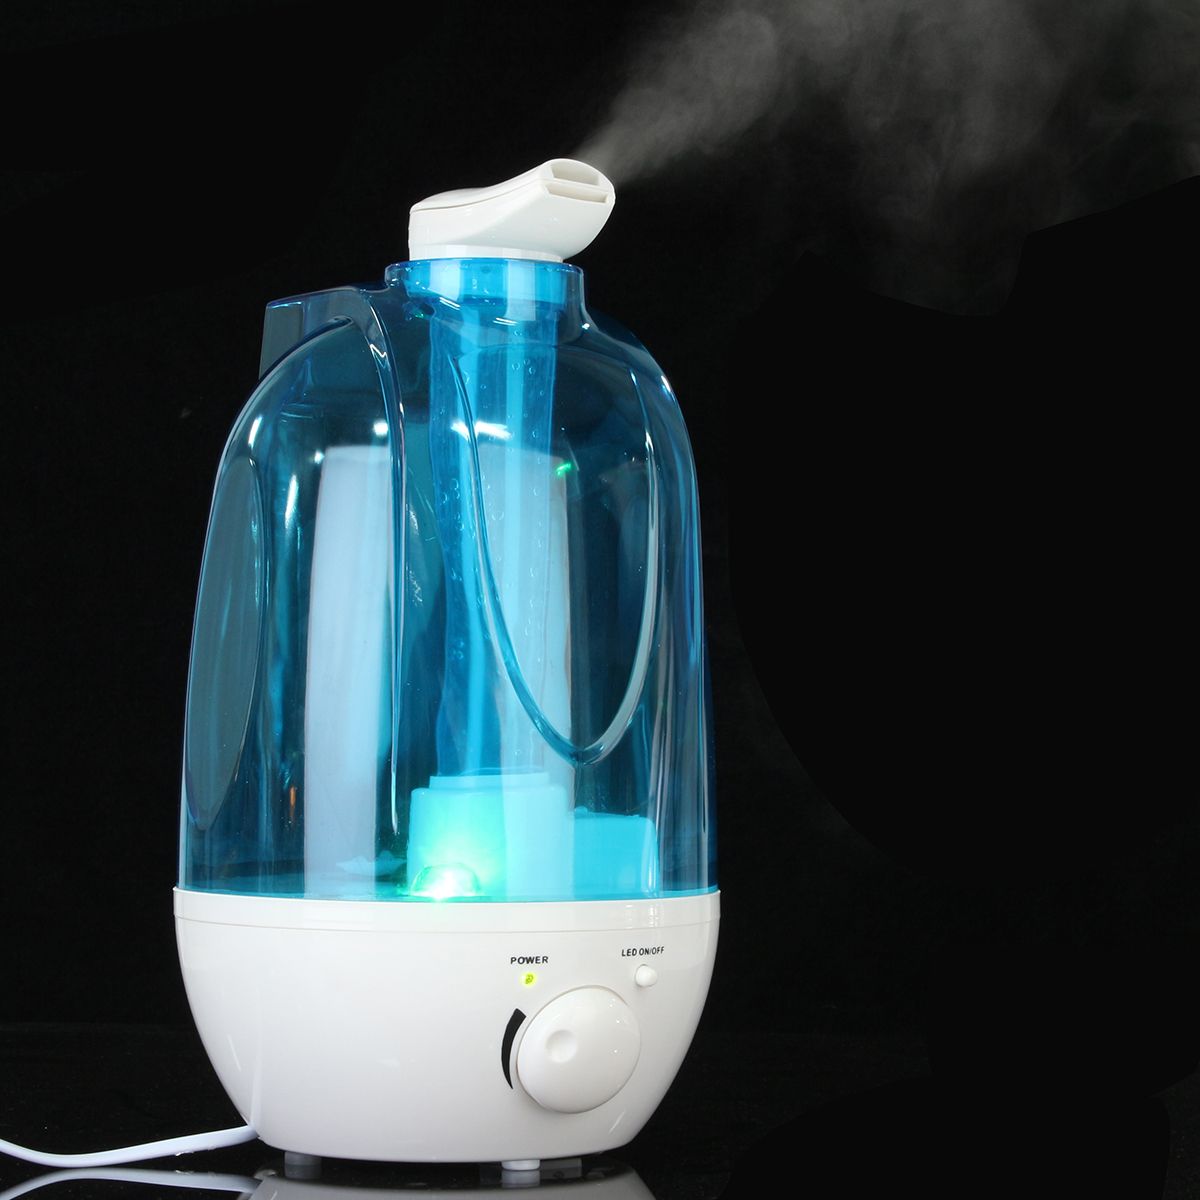 Automatic-4L-LED-Light-Ultrasonic-Humidifier-Variable-Spray-Control-amp-Direction-Air-Humidification-1365435